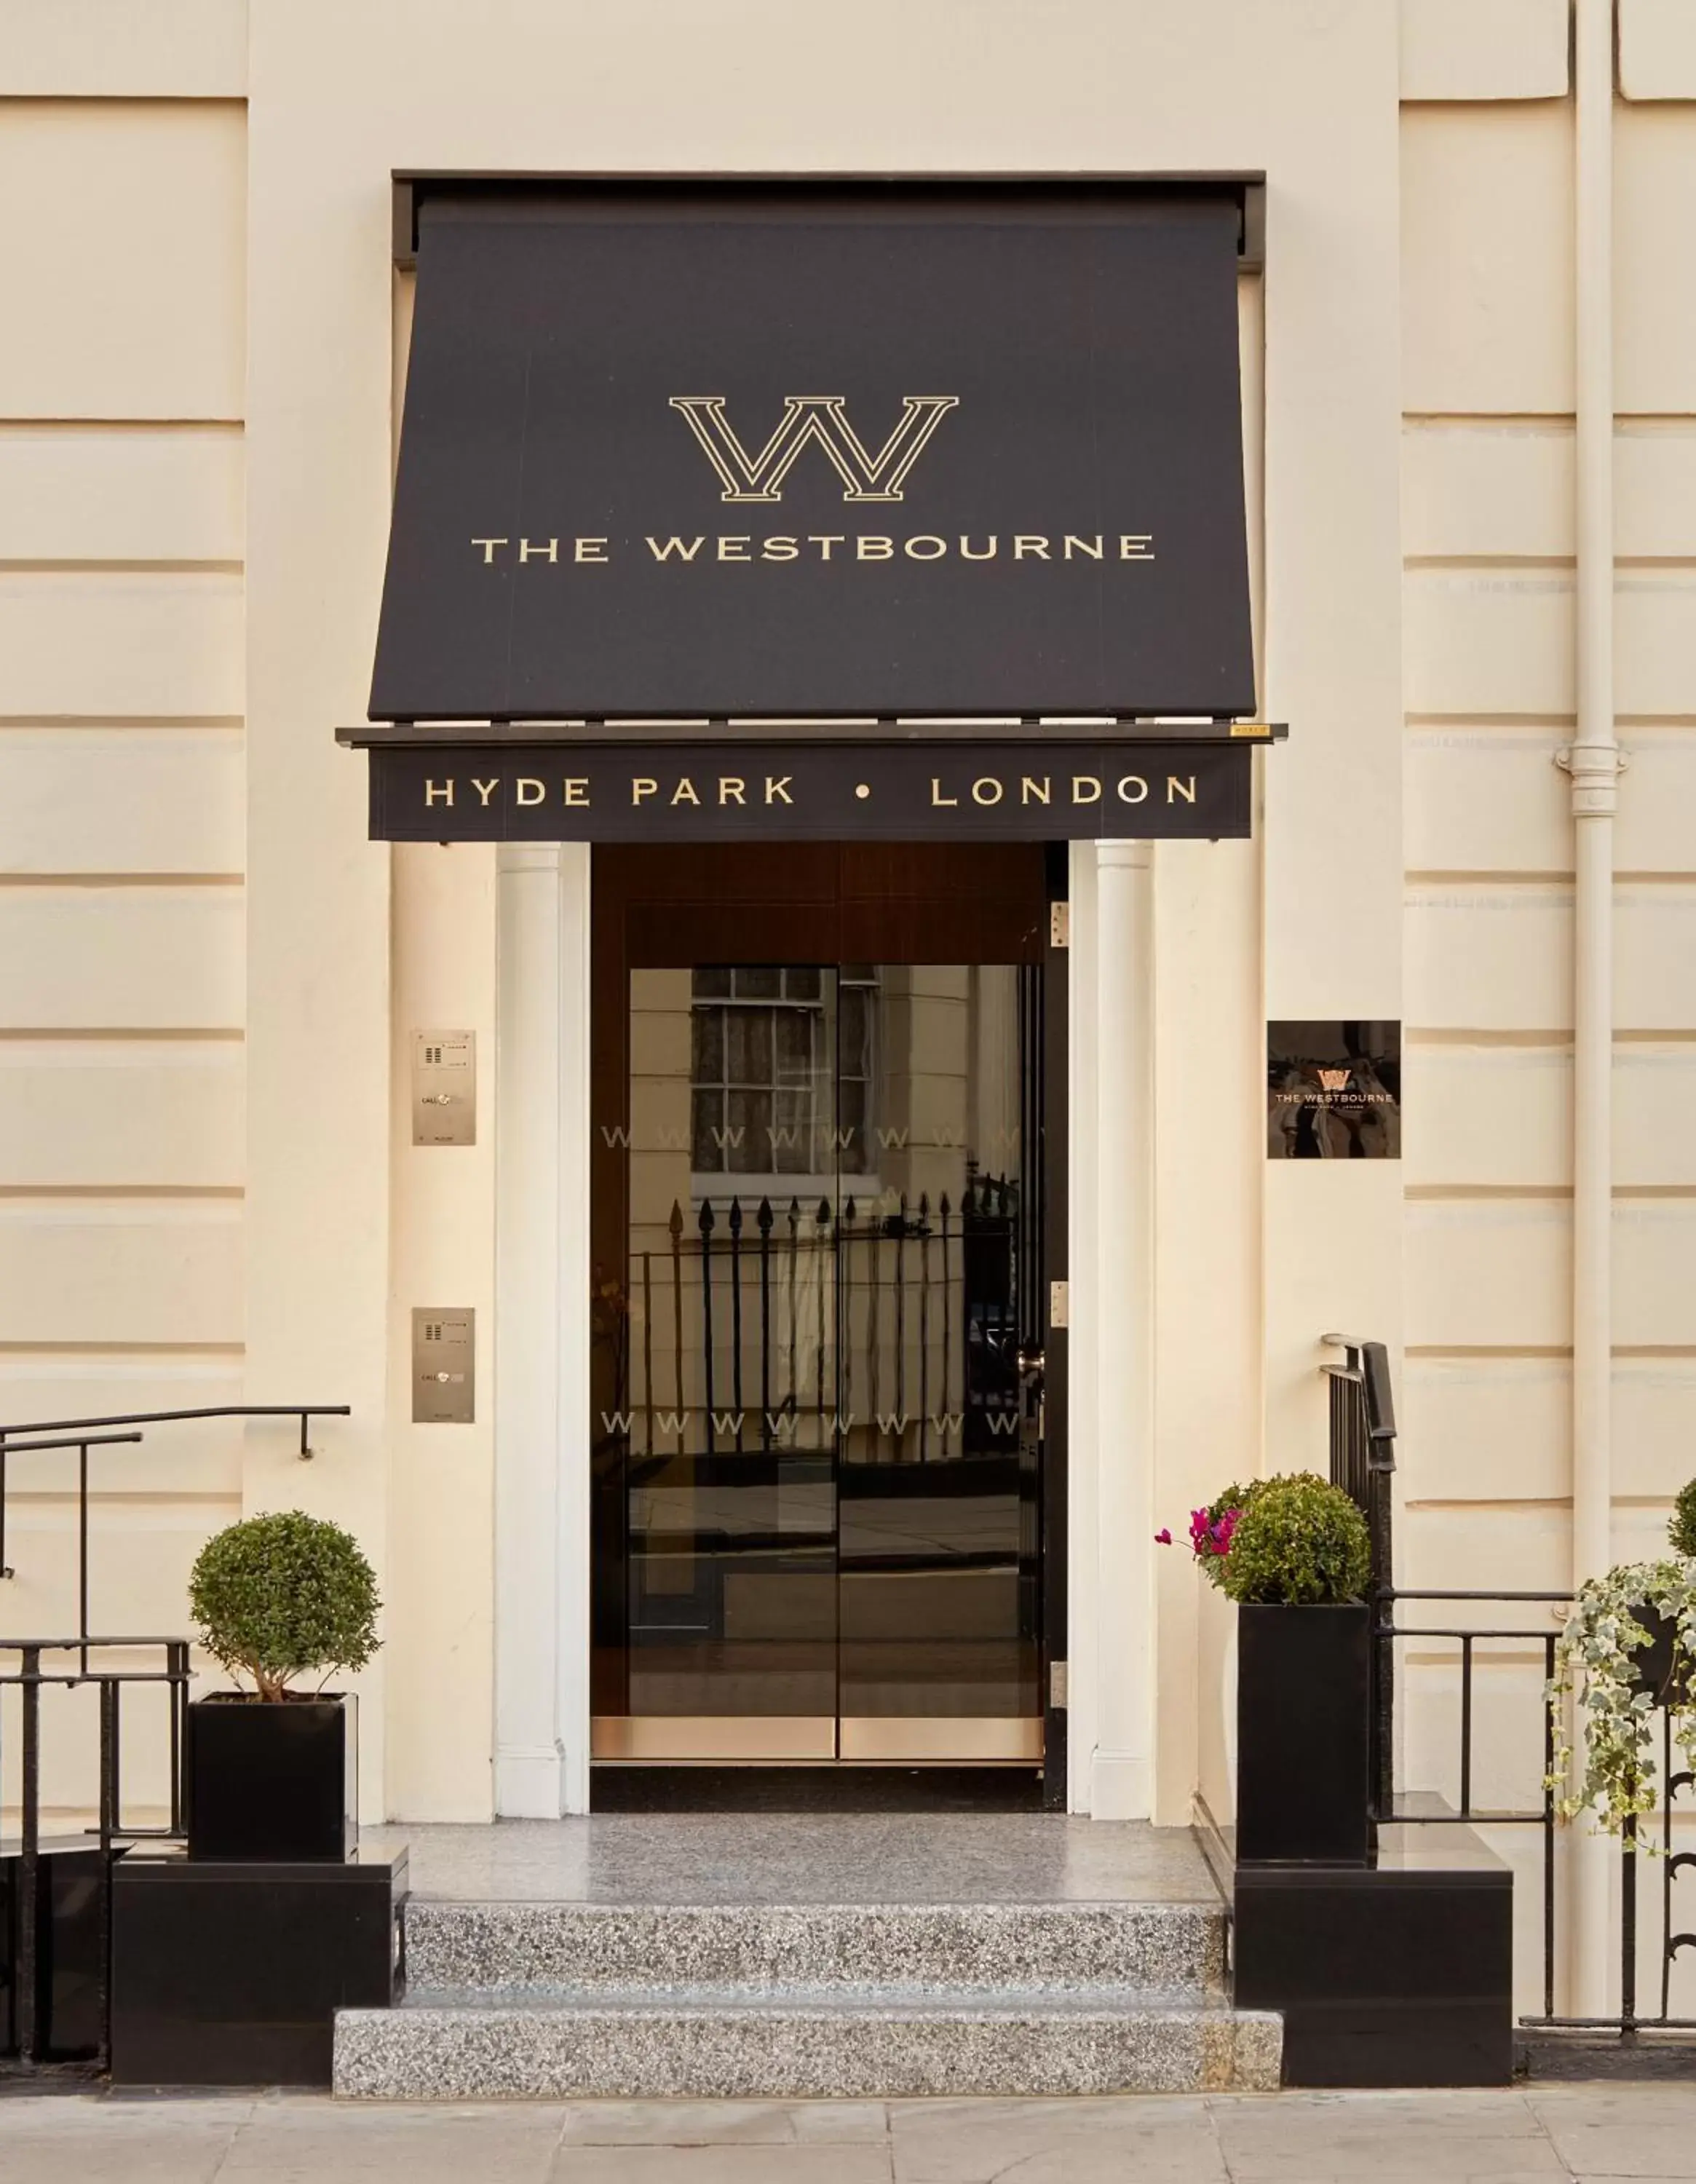 Property logo or sign in The Westbourne Hyde Park